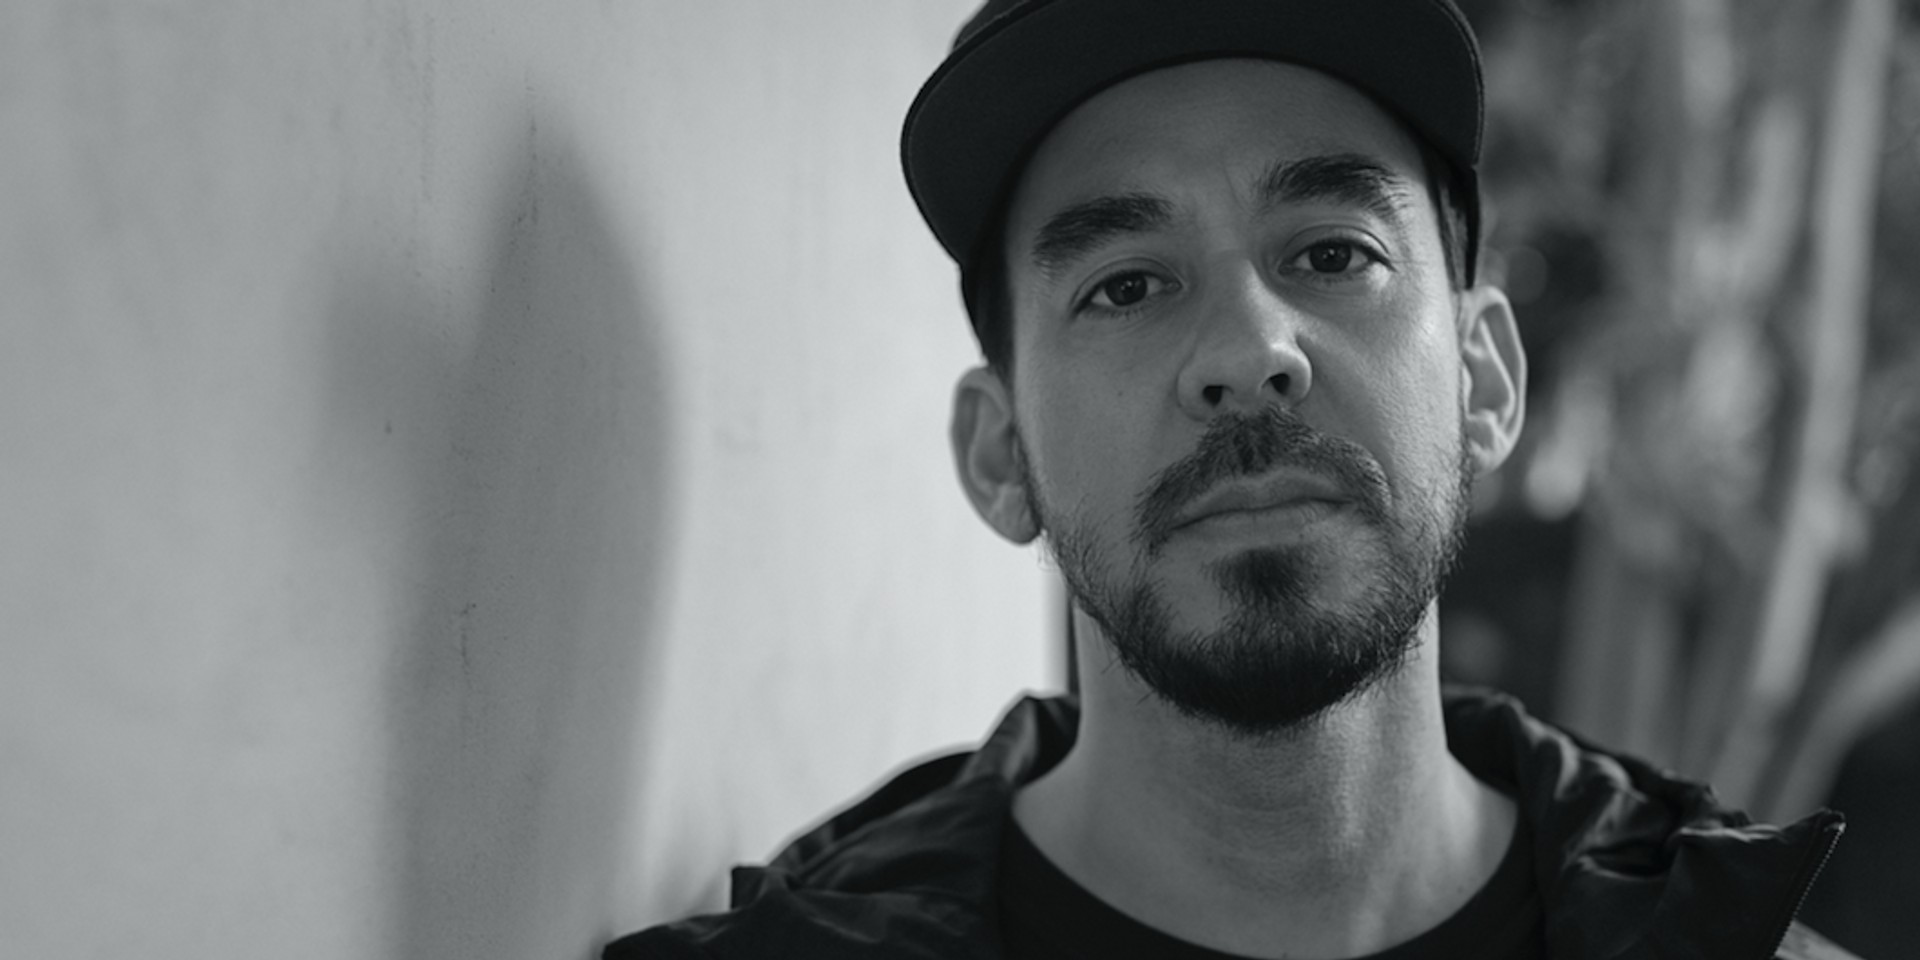 Mike Shinoda talks the creation of his debut solo album Post Traumatic, out this Friday